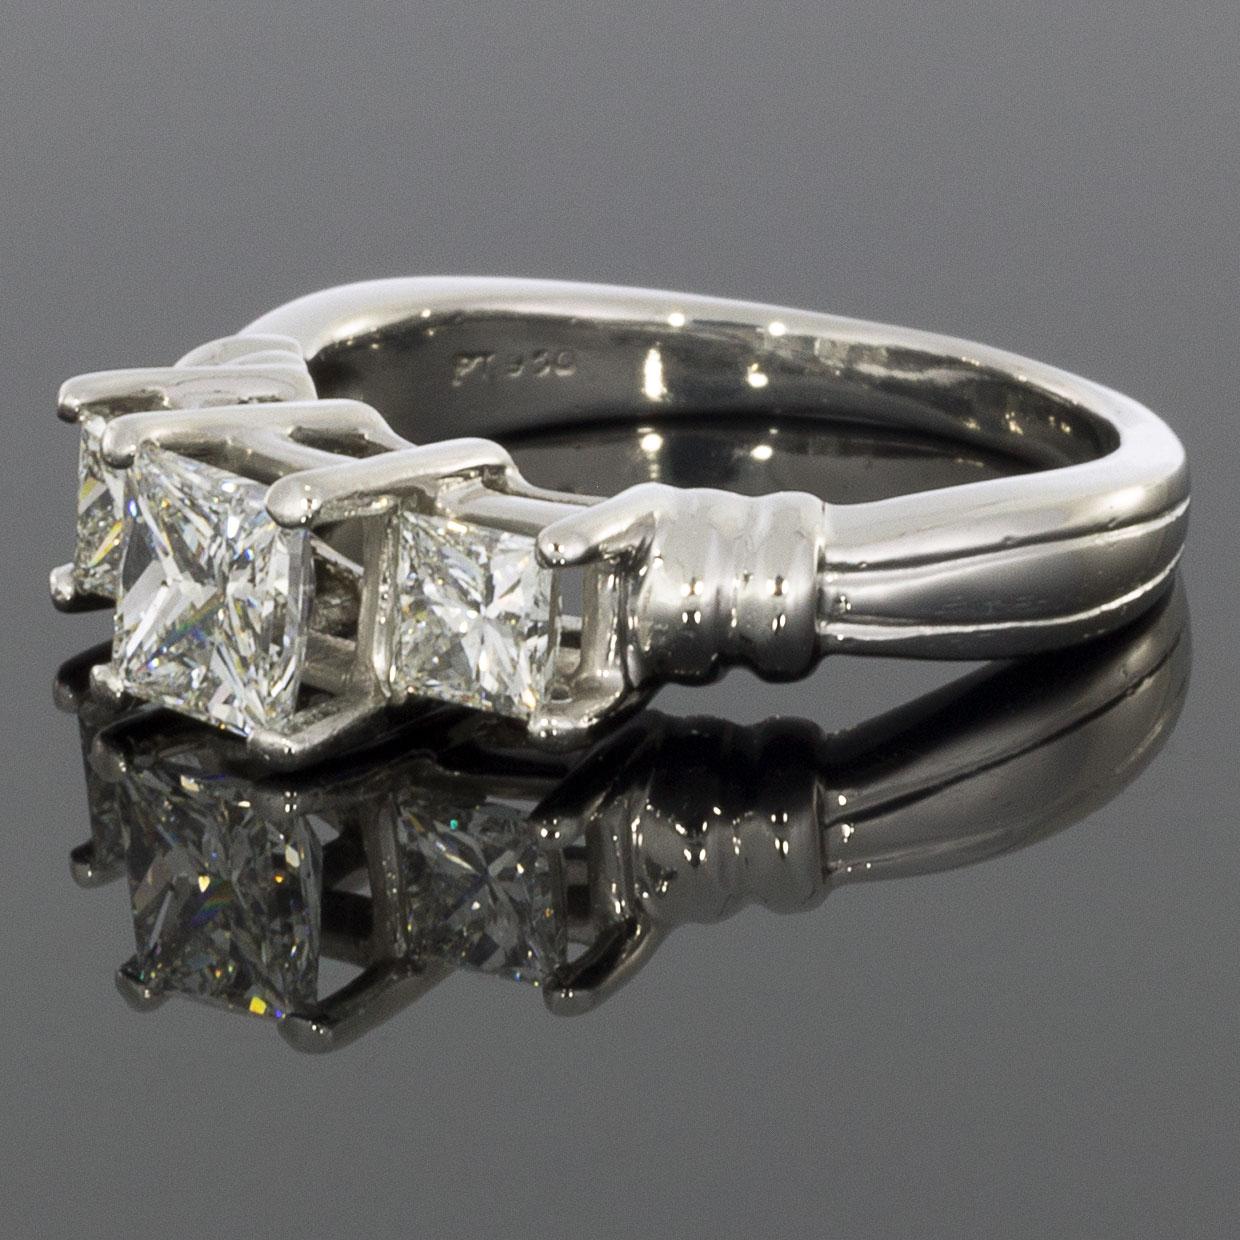 Item Details:
Estimated Retail - $6,000.00
Brand - Zales
Metal - 950 Platinum
Total Carat Weight (TCW) - 1.52 ctw
Certification/Grading - IGI
Style - Three Stone Engagement Ring
Ring Size - 6.50
Sizable - Yes
Width - 4.00 mm

Stone 1